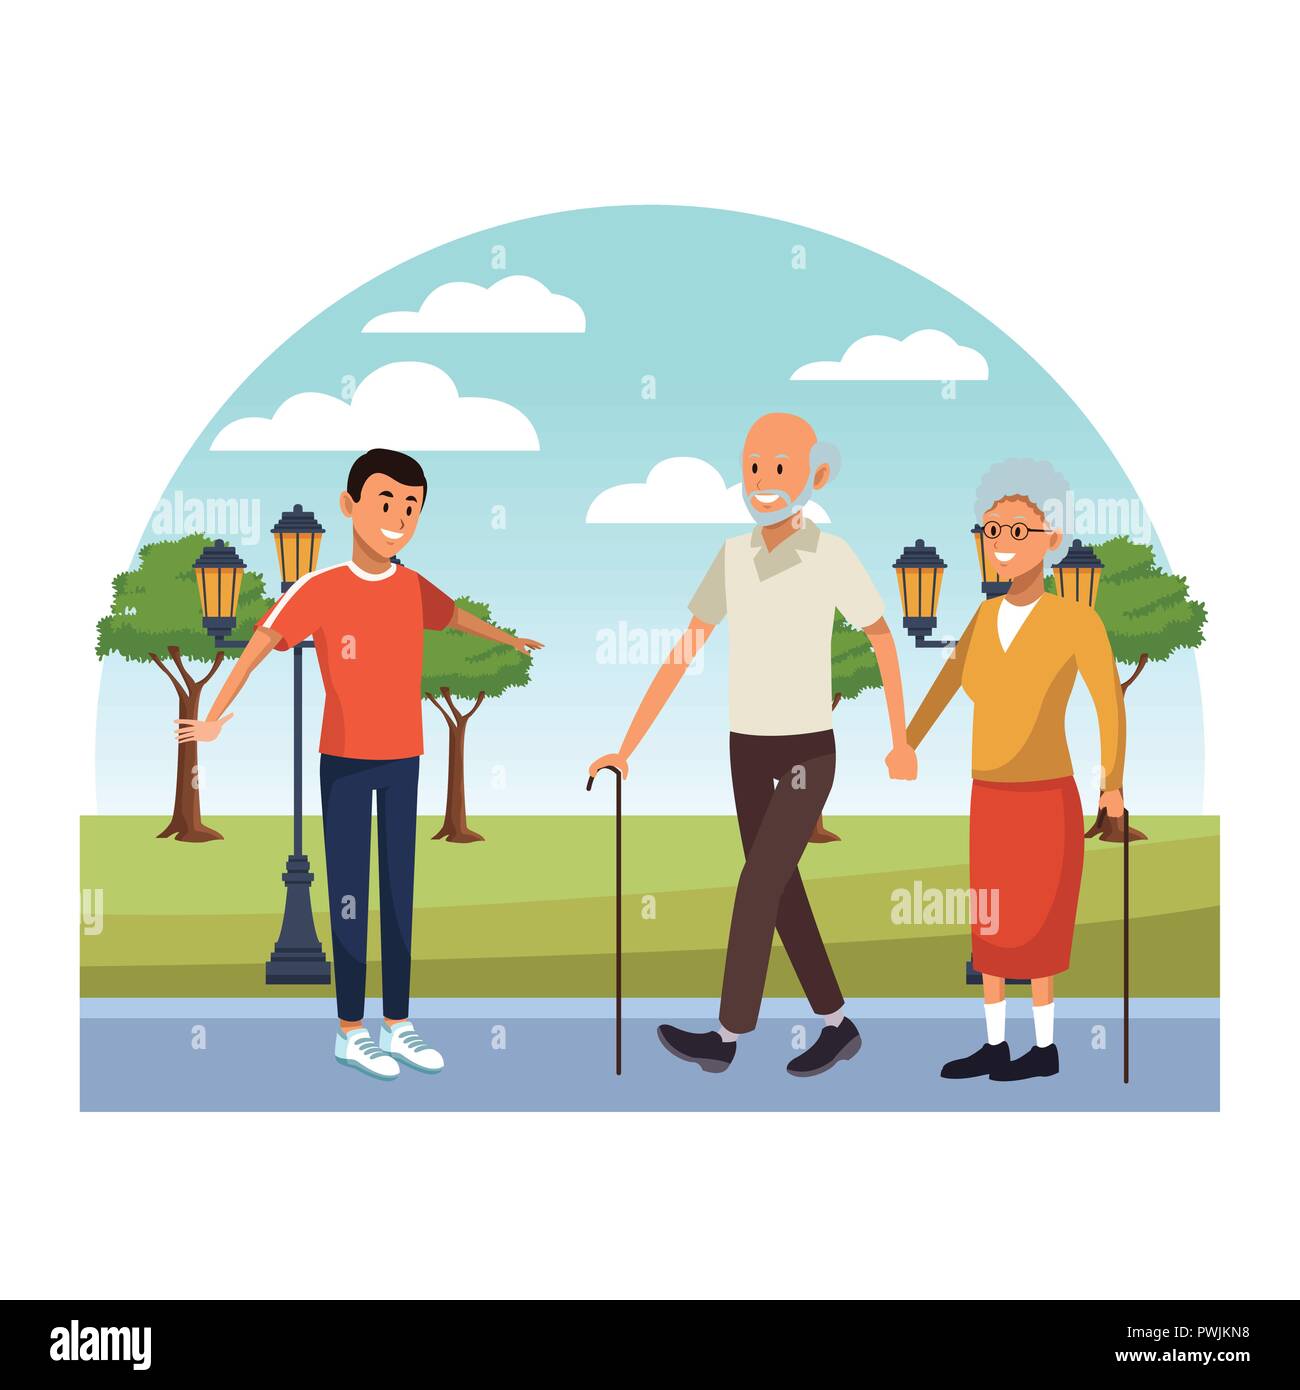 young person giving support and helping the elderly cartoon vector illustration graphic design Stock Vector